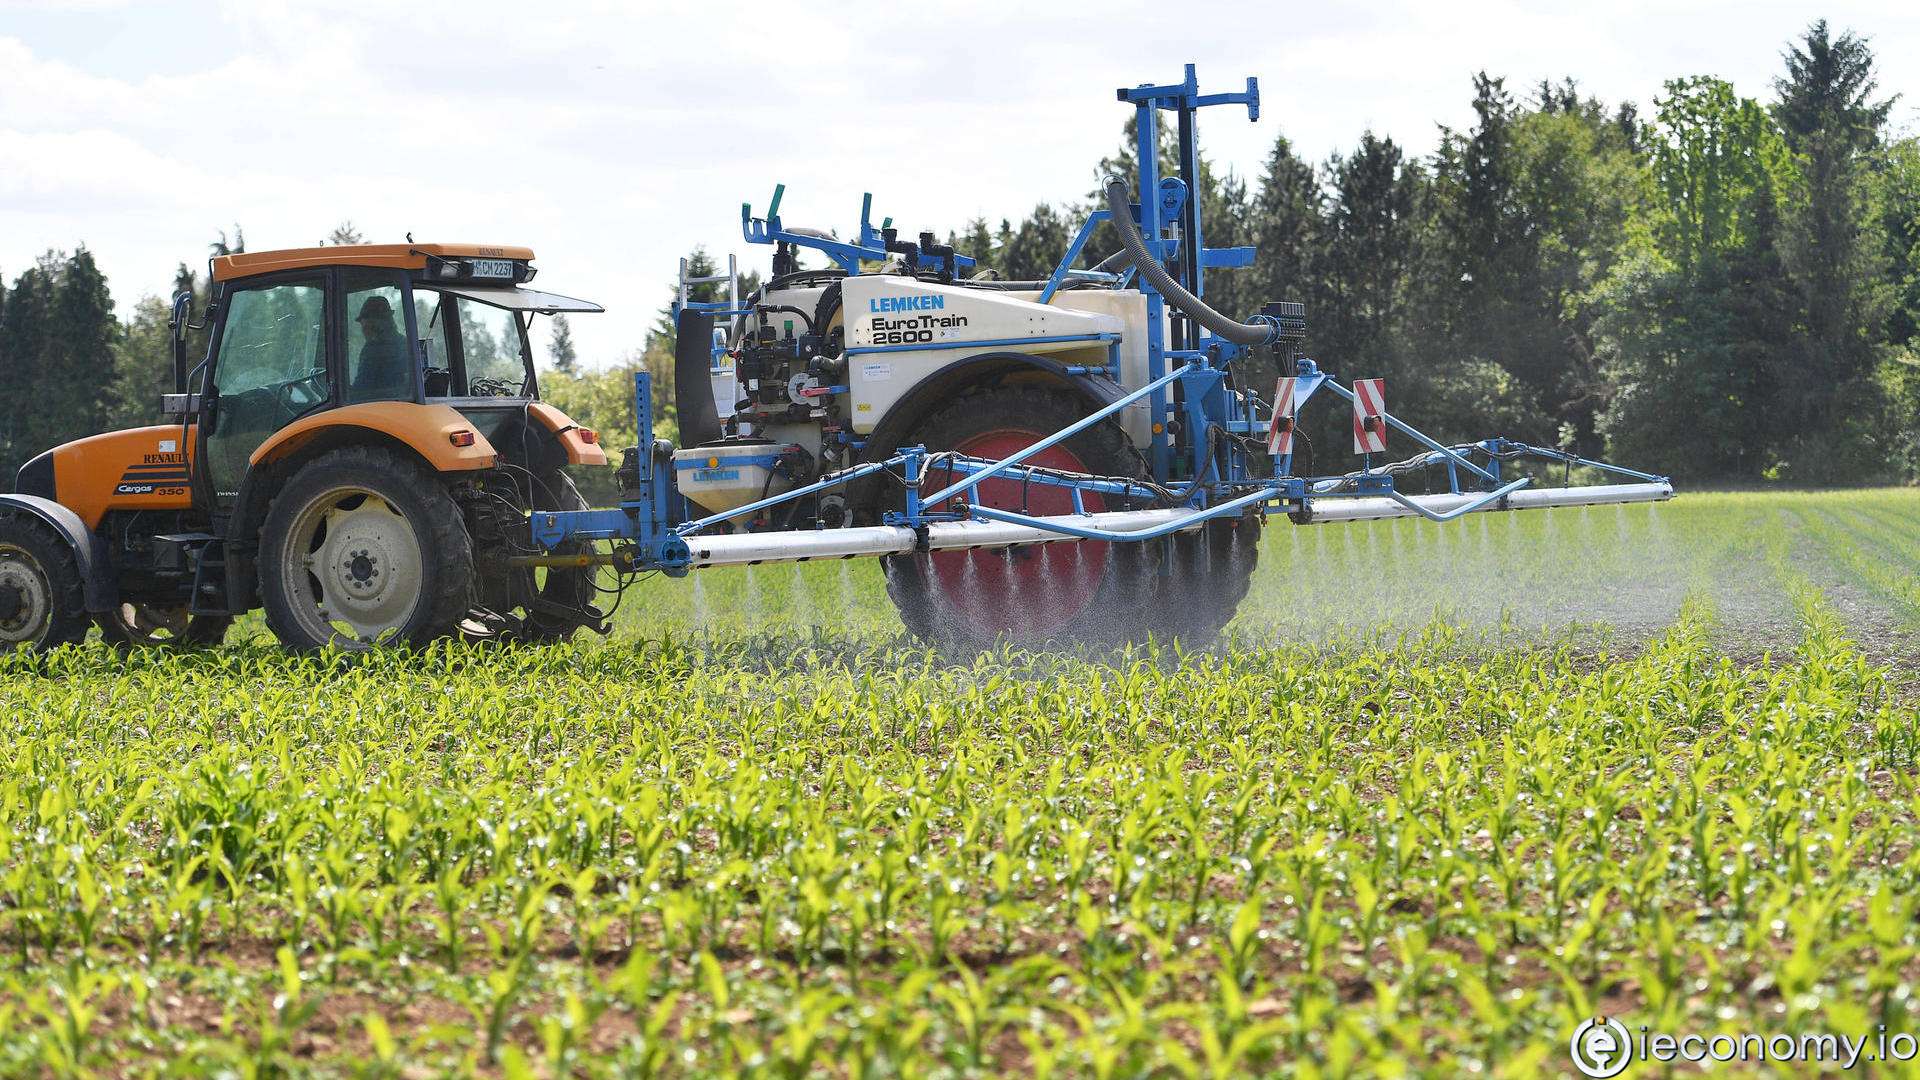 The herbicide glyphosate may only be used to a limited extent in Germany